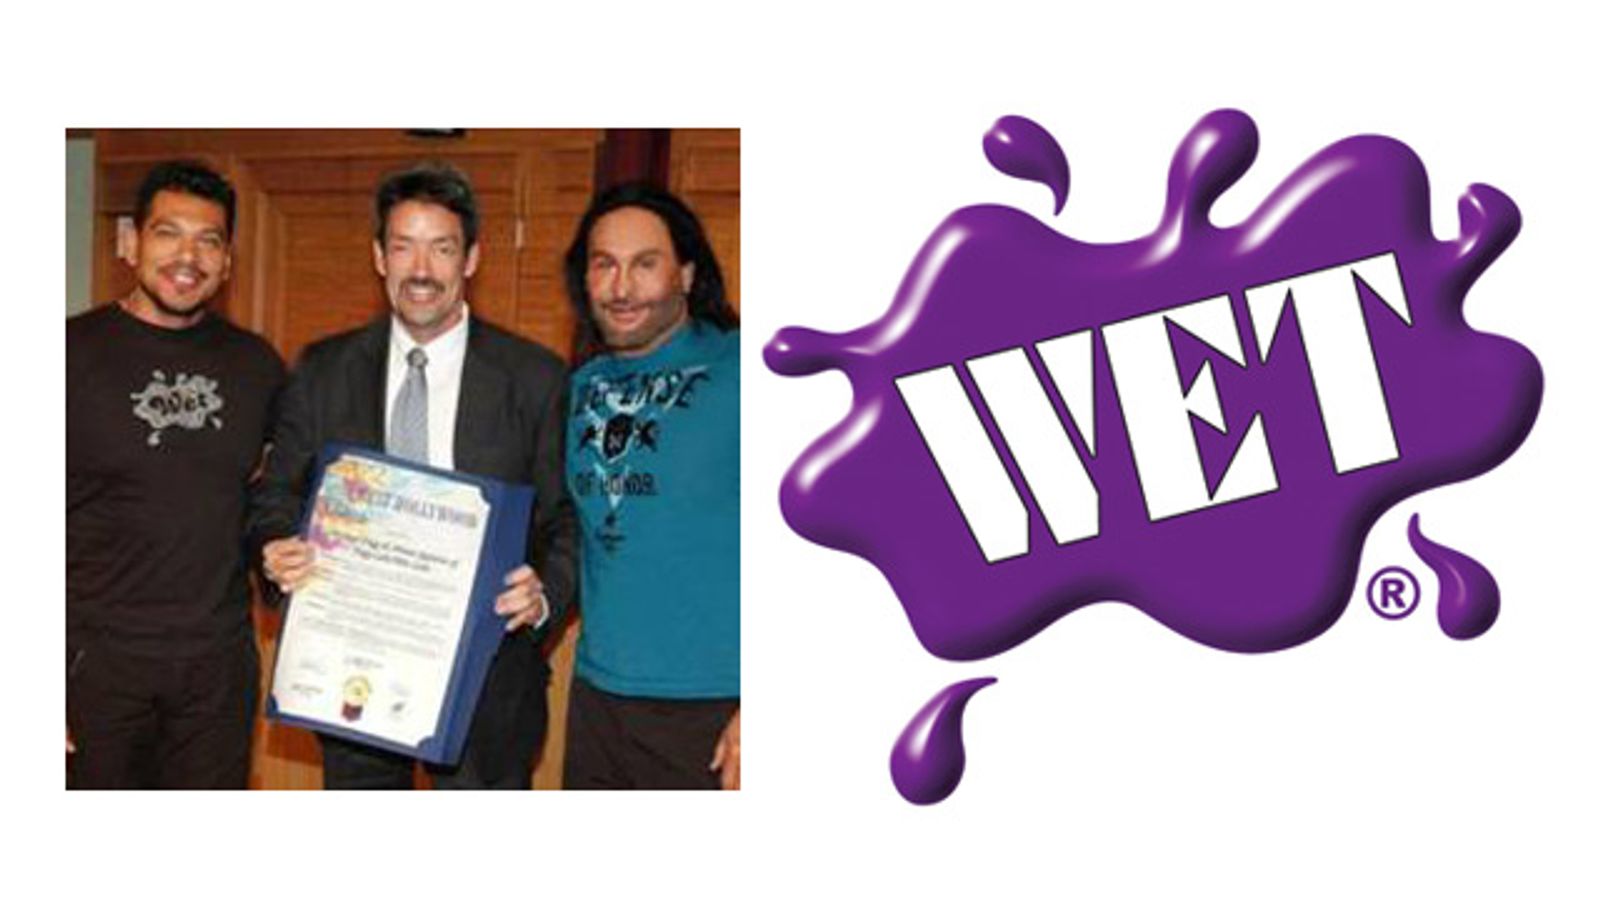 Trigg Laboratories Executives Commended By City of West Hollywood